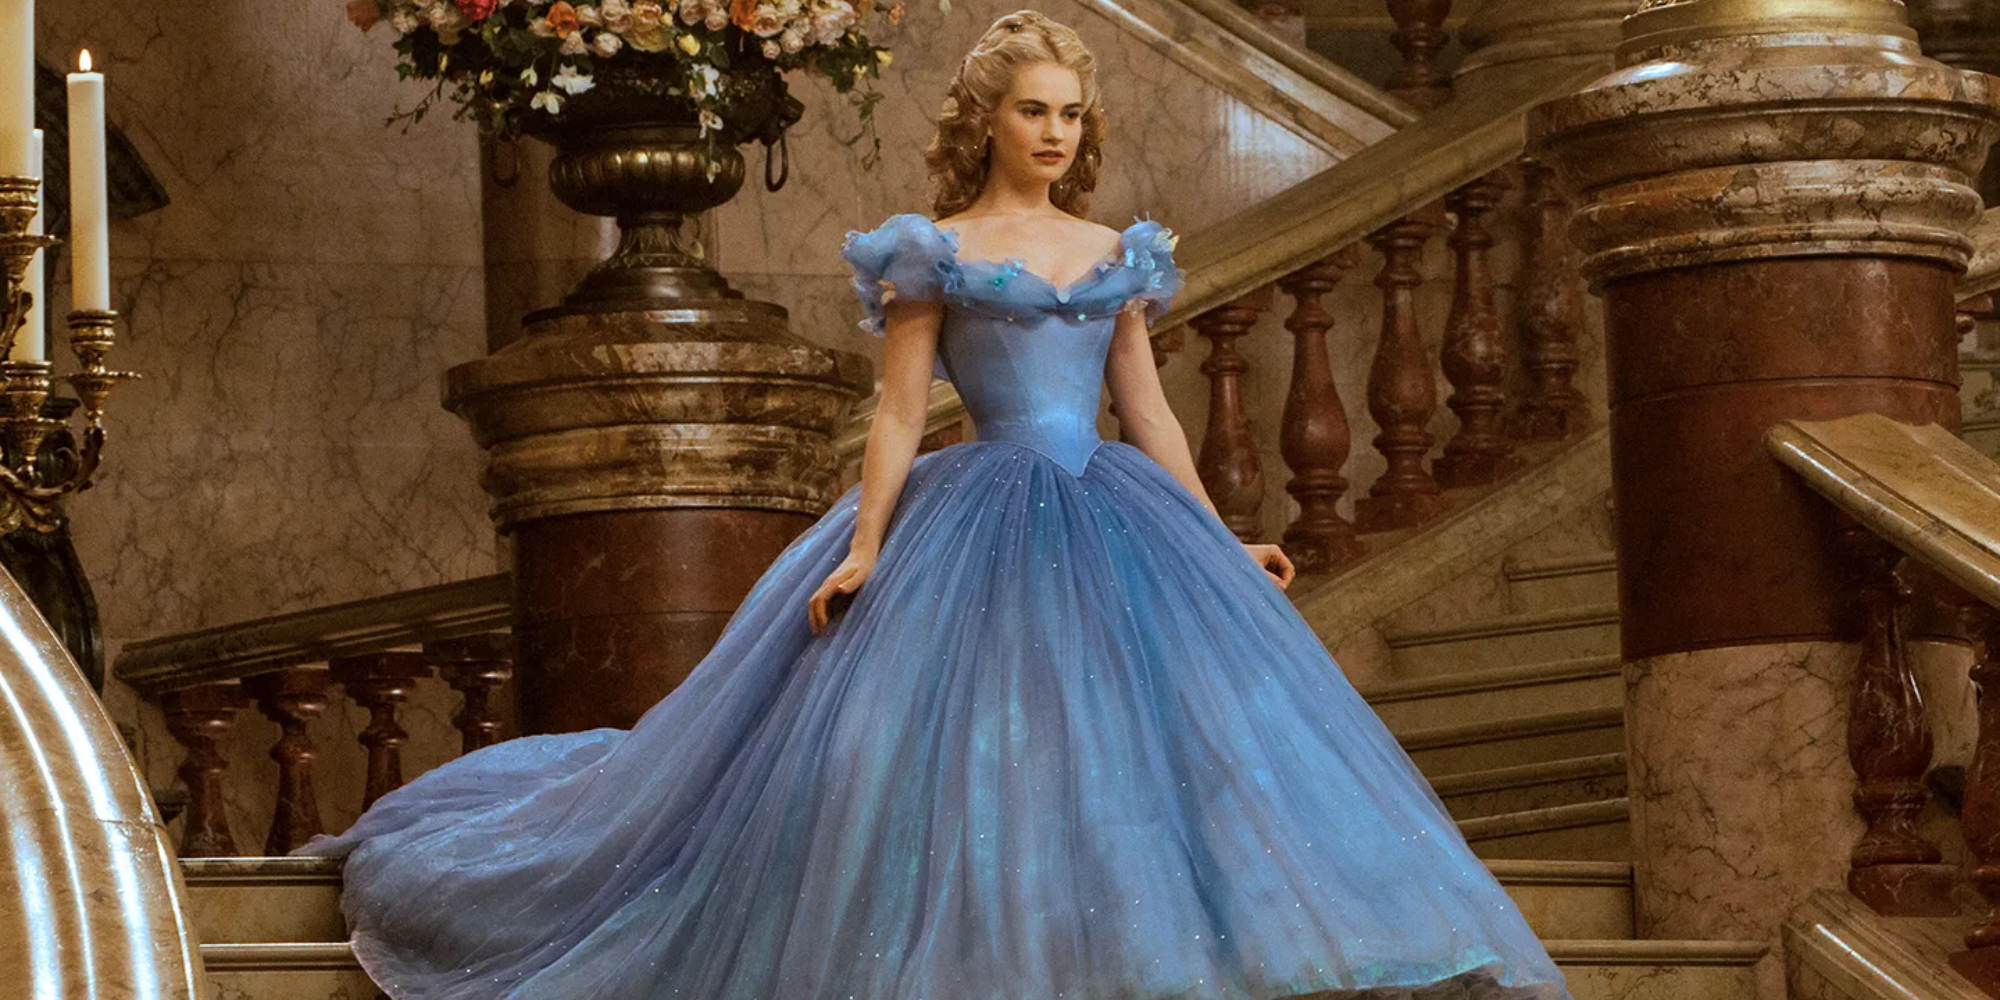 Lily James as Ella/Cinderella walking down a set of stairs wearing her blue gown in Cinderella